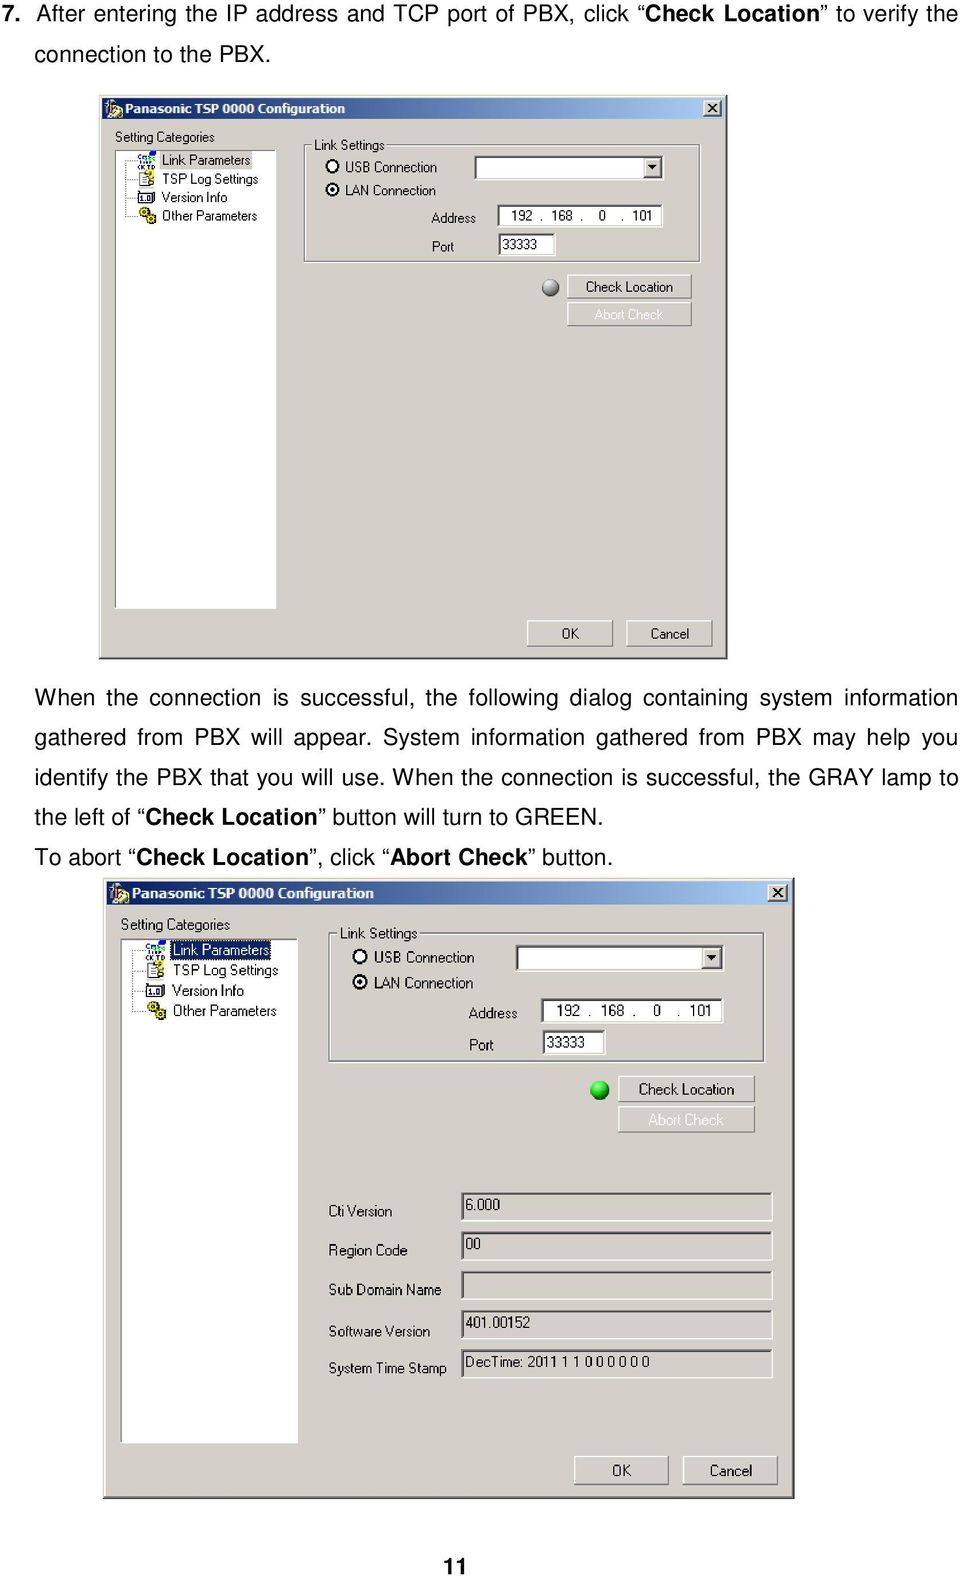 System information gathered from PBX may help you identify the PBX that you will use.